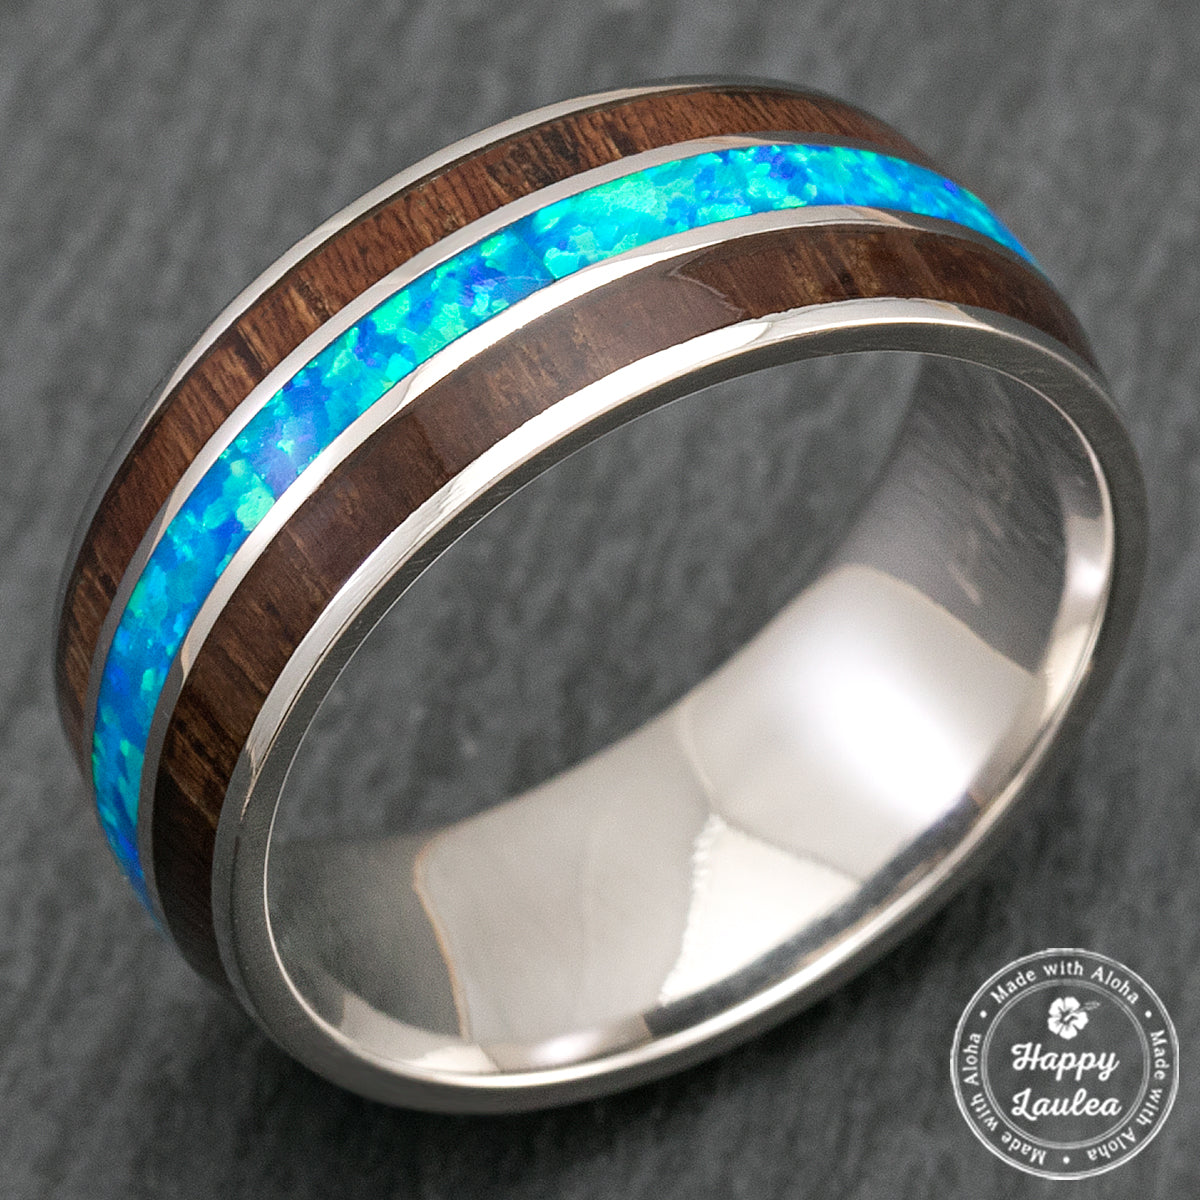 14K White Gold or Platinum Ring with Hawaiian Koa Wood & Blue Opal Tri-Inlay - 8mm, Dome Shape, Comfort Fitment